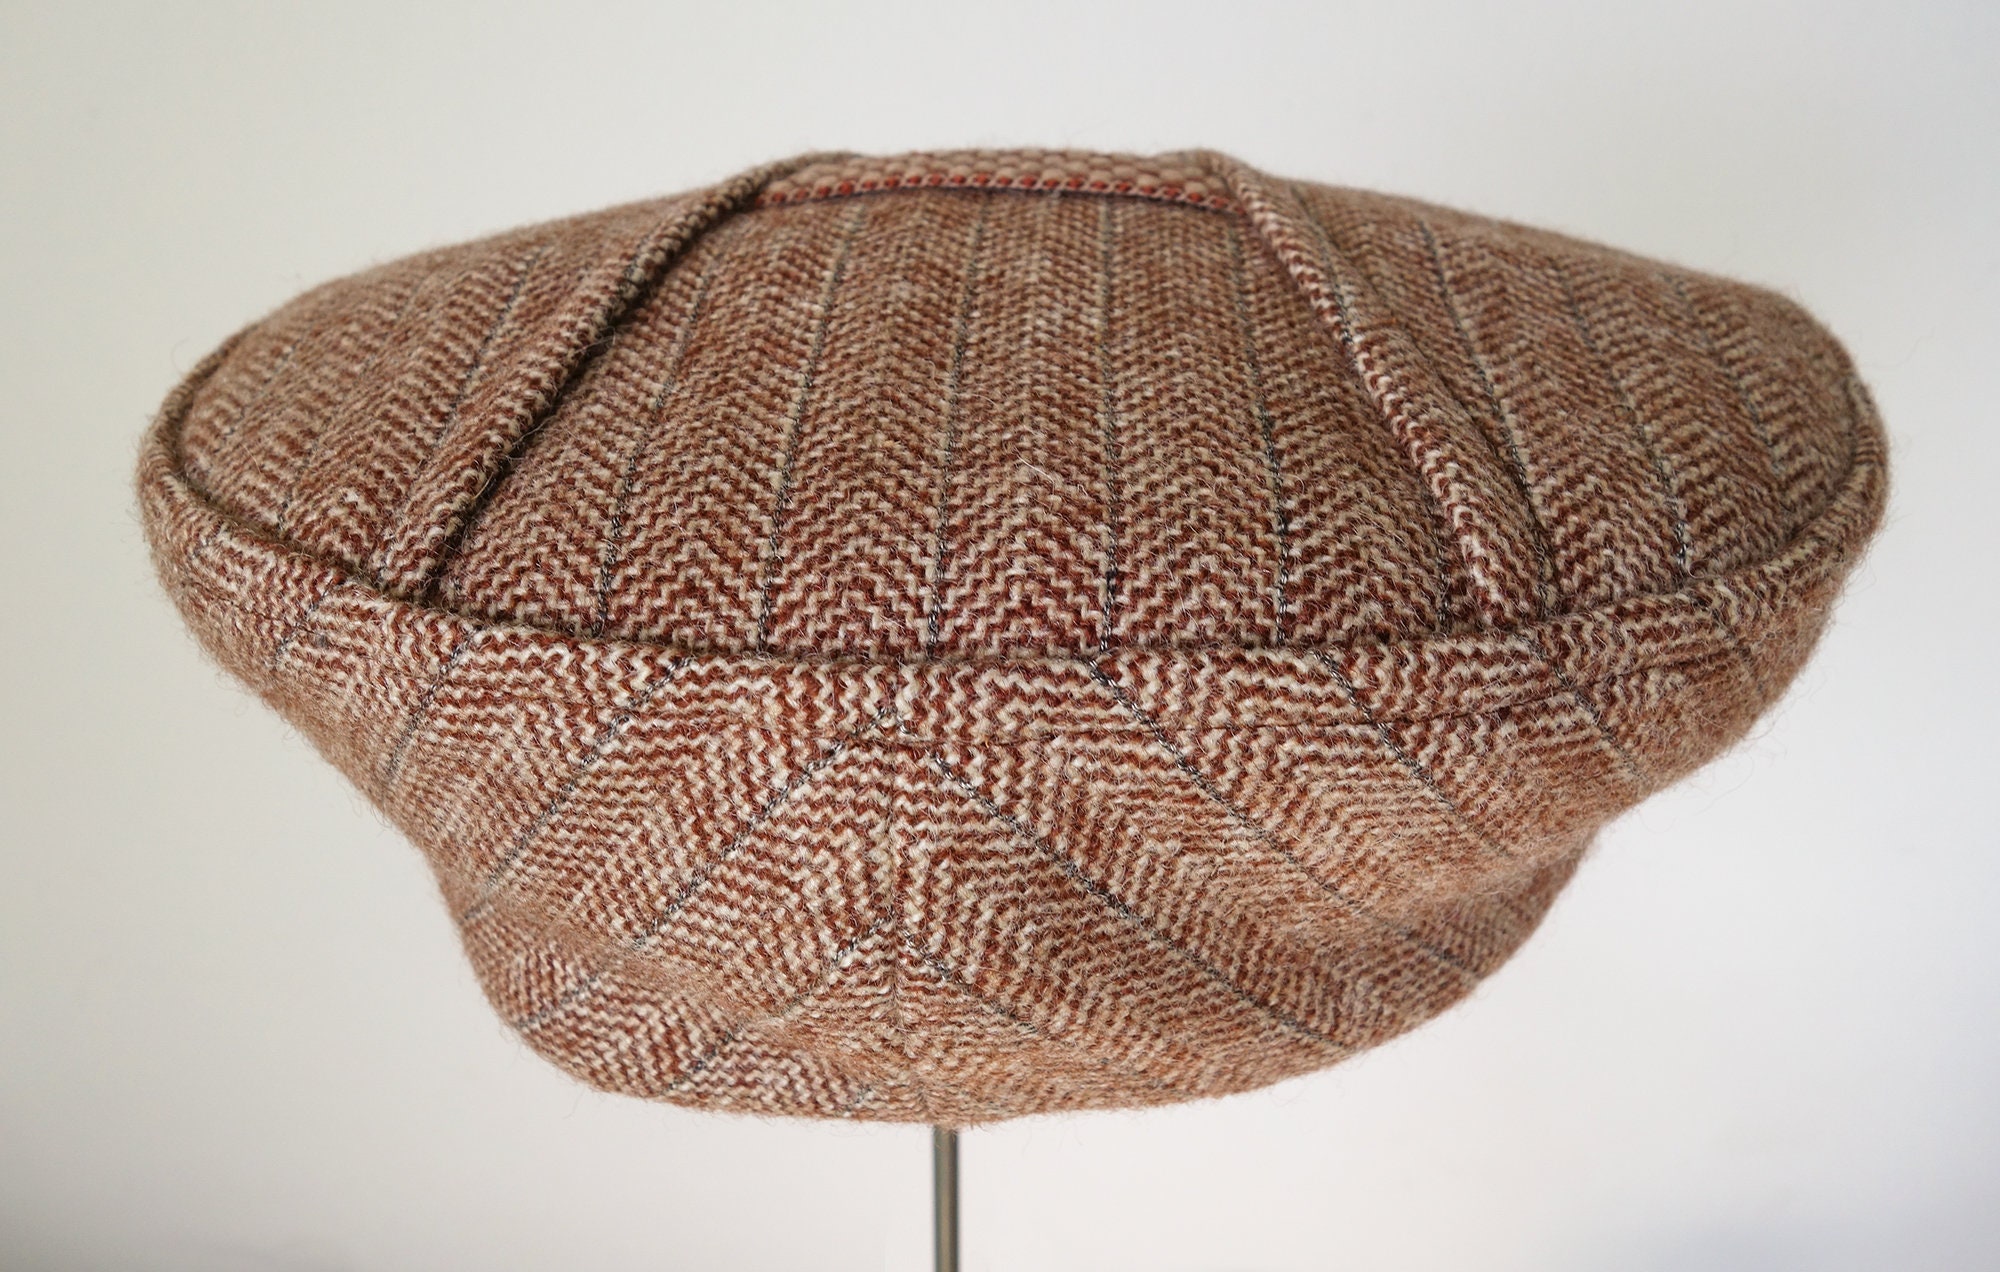 The SAVOY Novelty Zigzag V-top 1930s Ribbon Tweed and With in French Detailing Etsy 1920s-design Cap Order - to Made Flat Vintage Herringbone